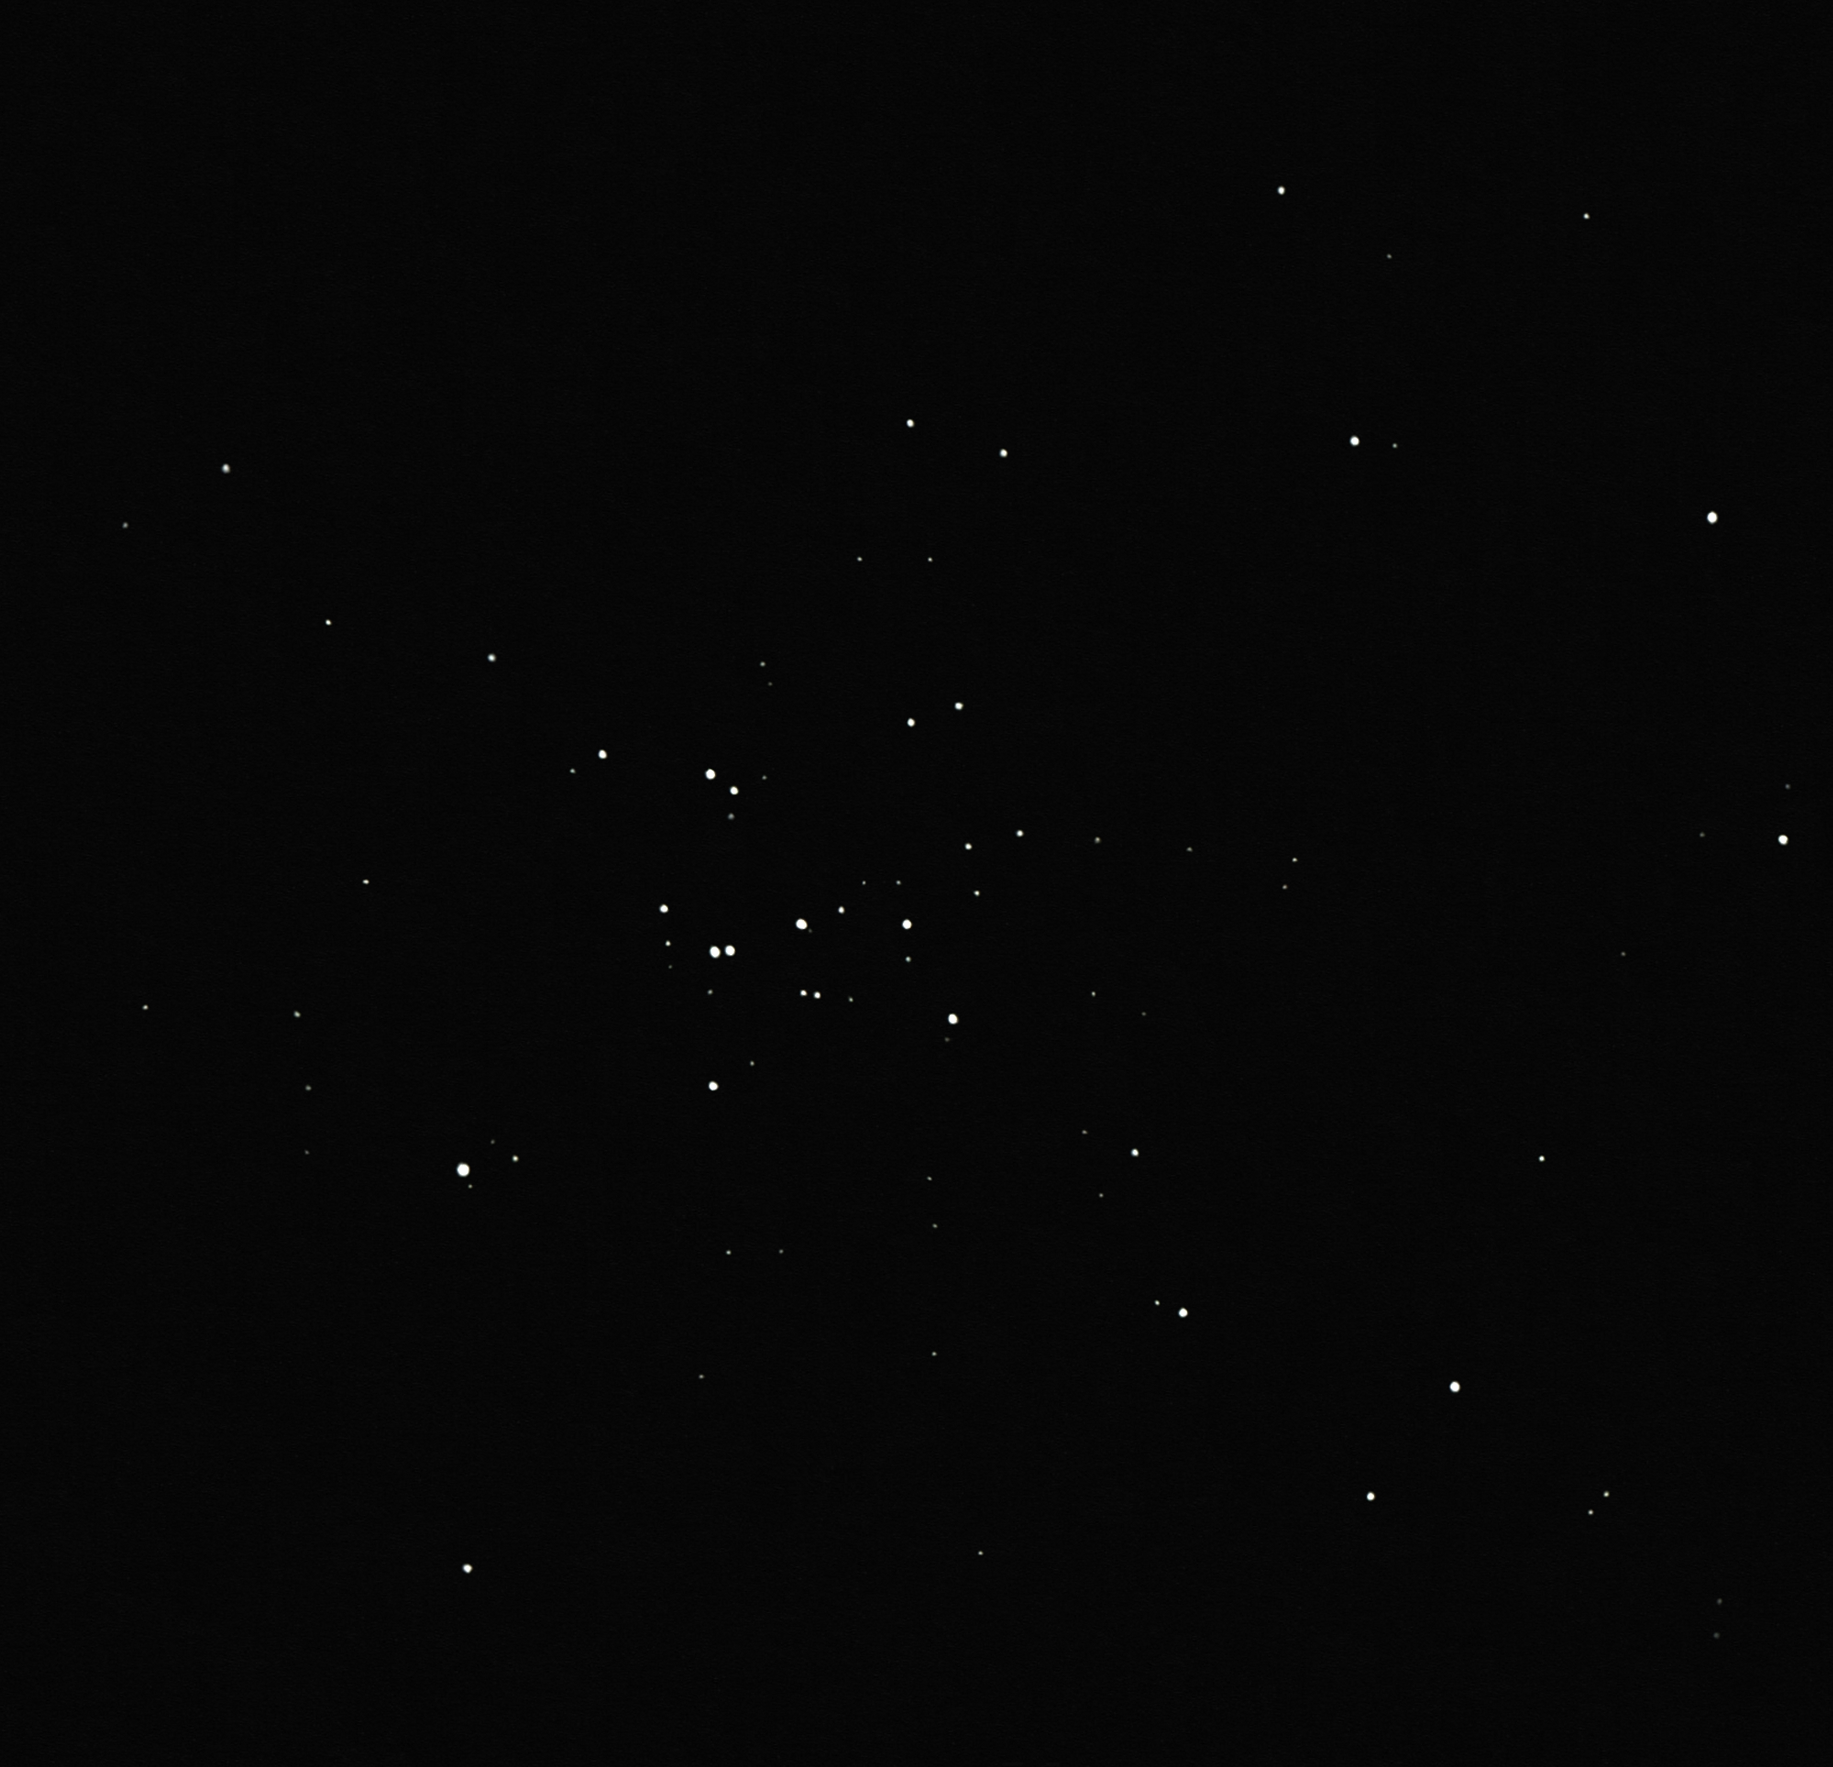 M36 open cluster